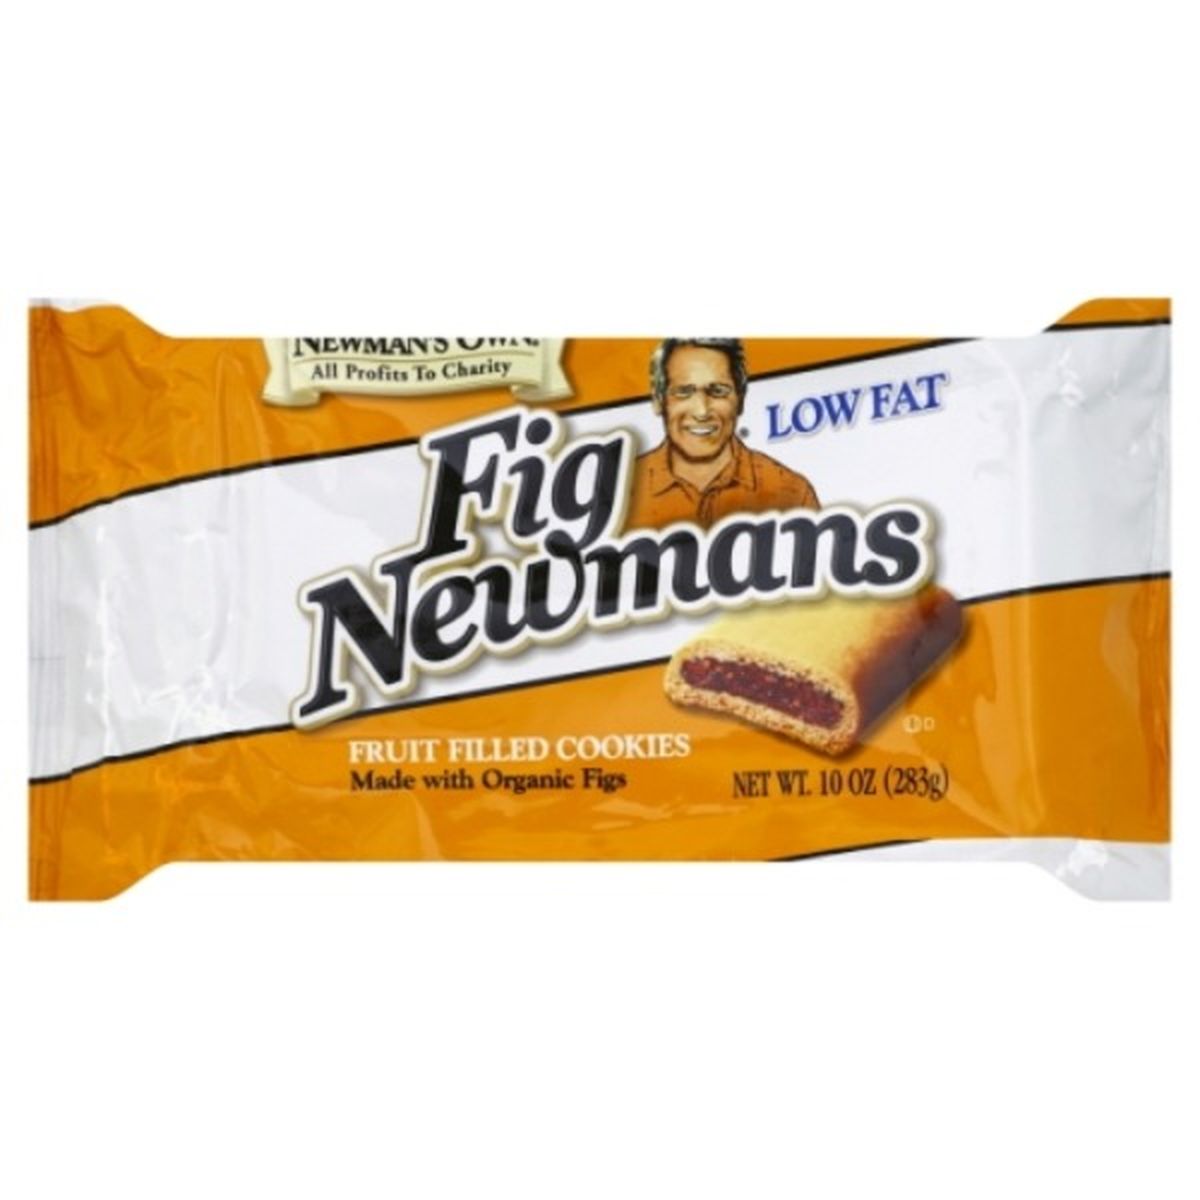 Calories in Newman's Own Cookies, Fruit Filled, Low Fat, Fig Newmans